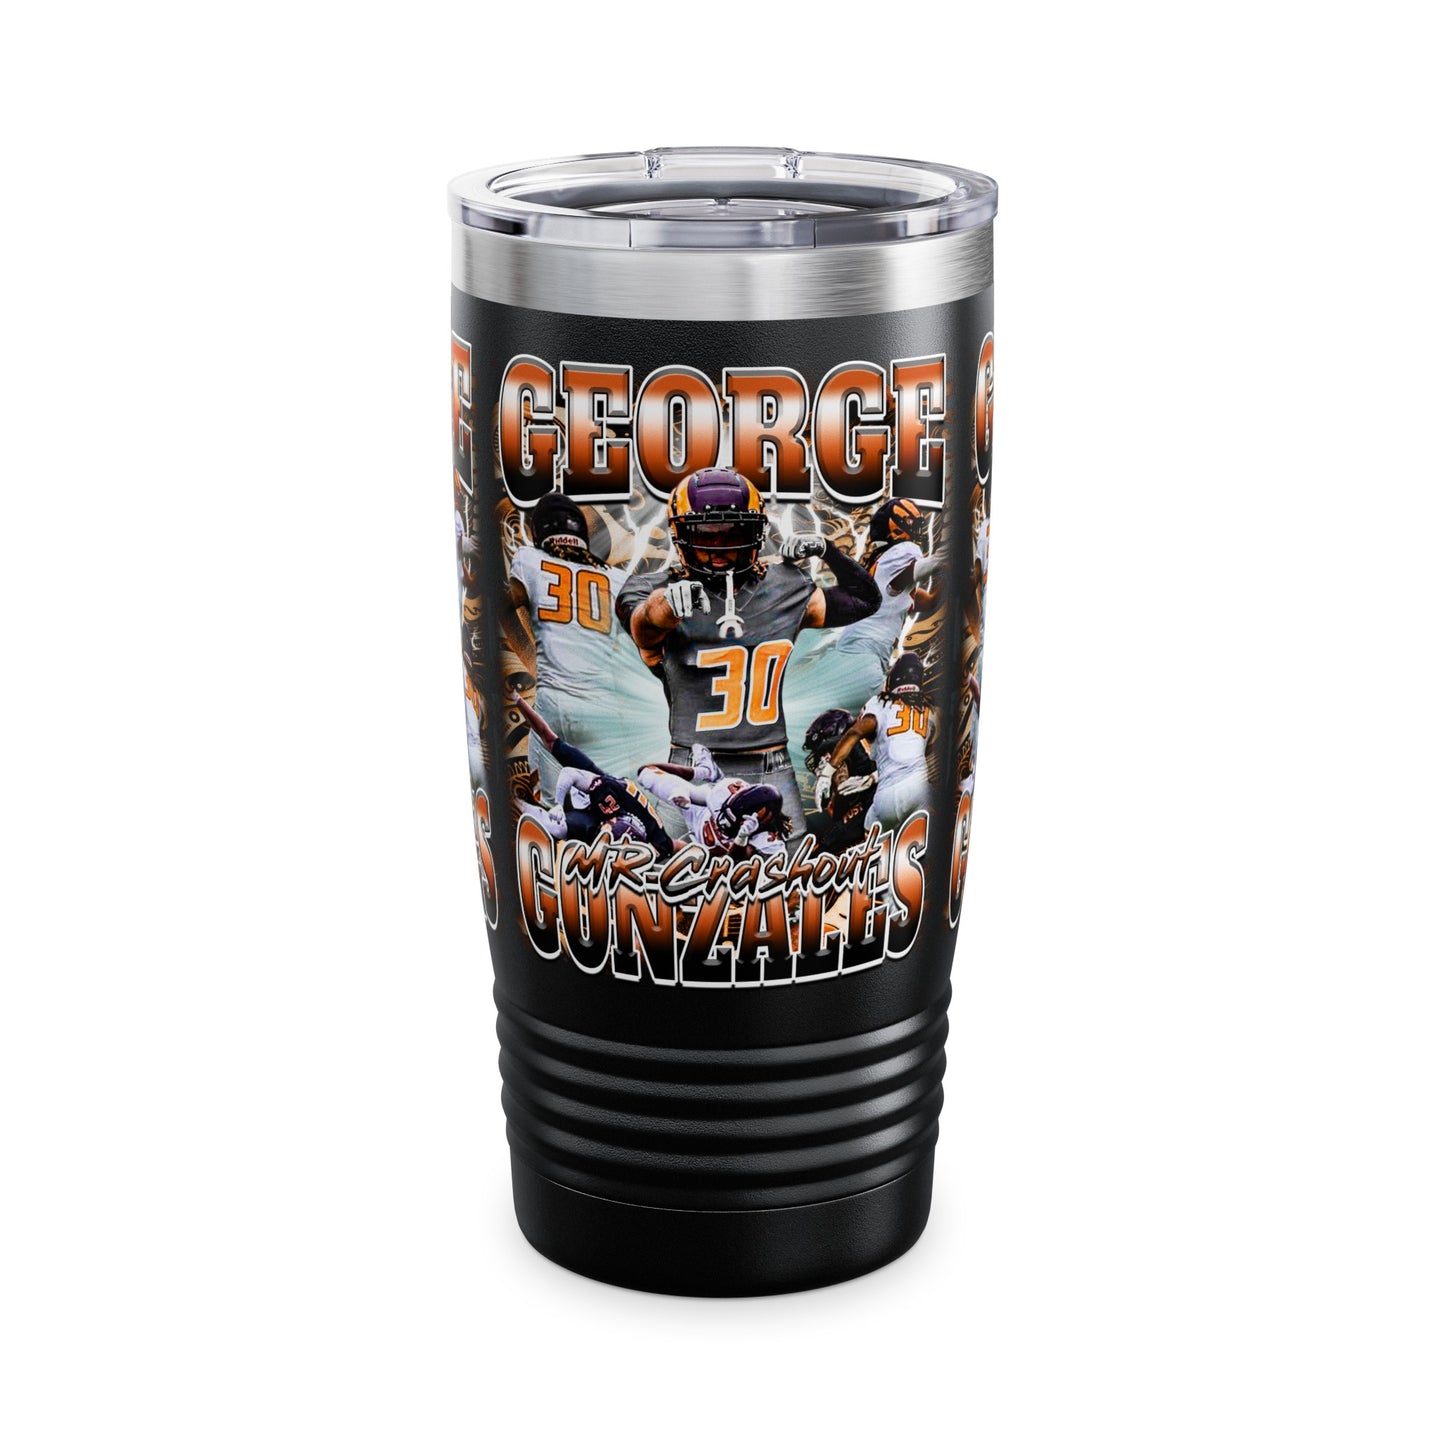 George Gonzales Stainless Steal Tumbler